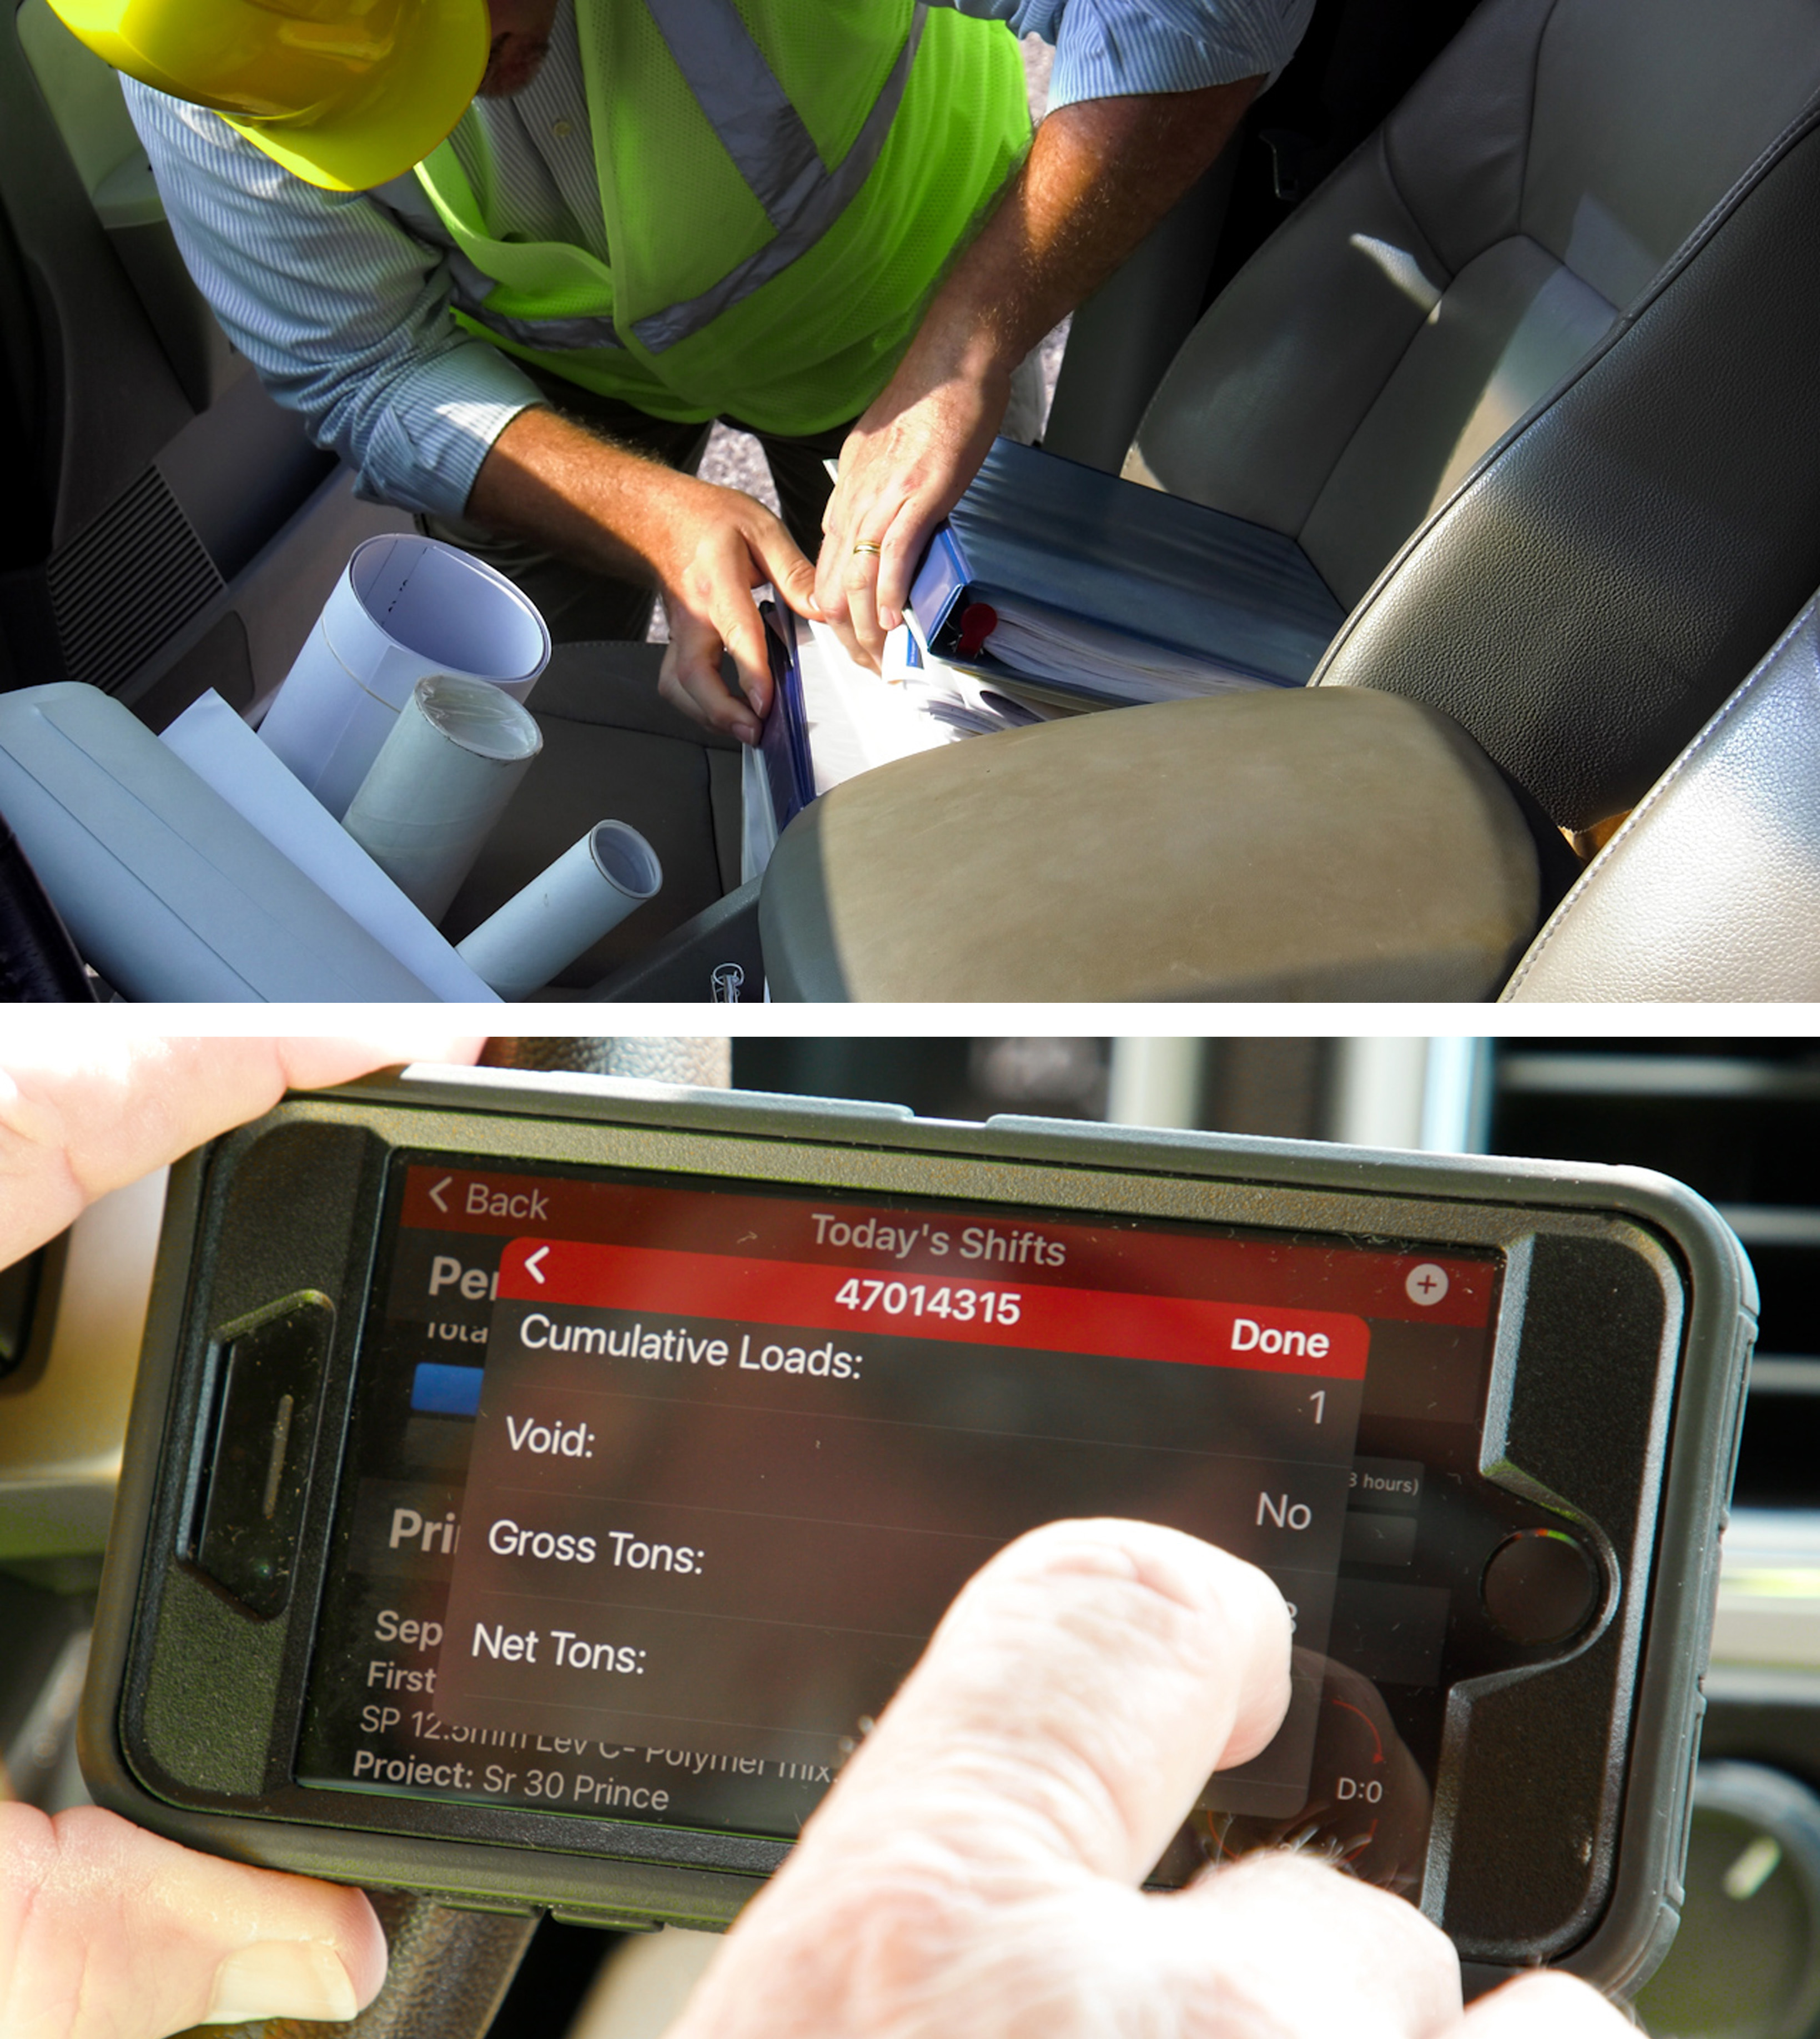 Two images stacked top to bottom. The top image is a man in a safety vest looking through thick binders in the front seat of a vehicle. The bottom image is a close up of a smart phone with construction material information on the screen.